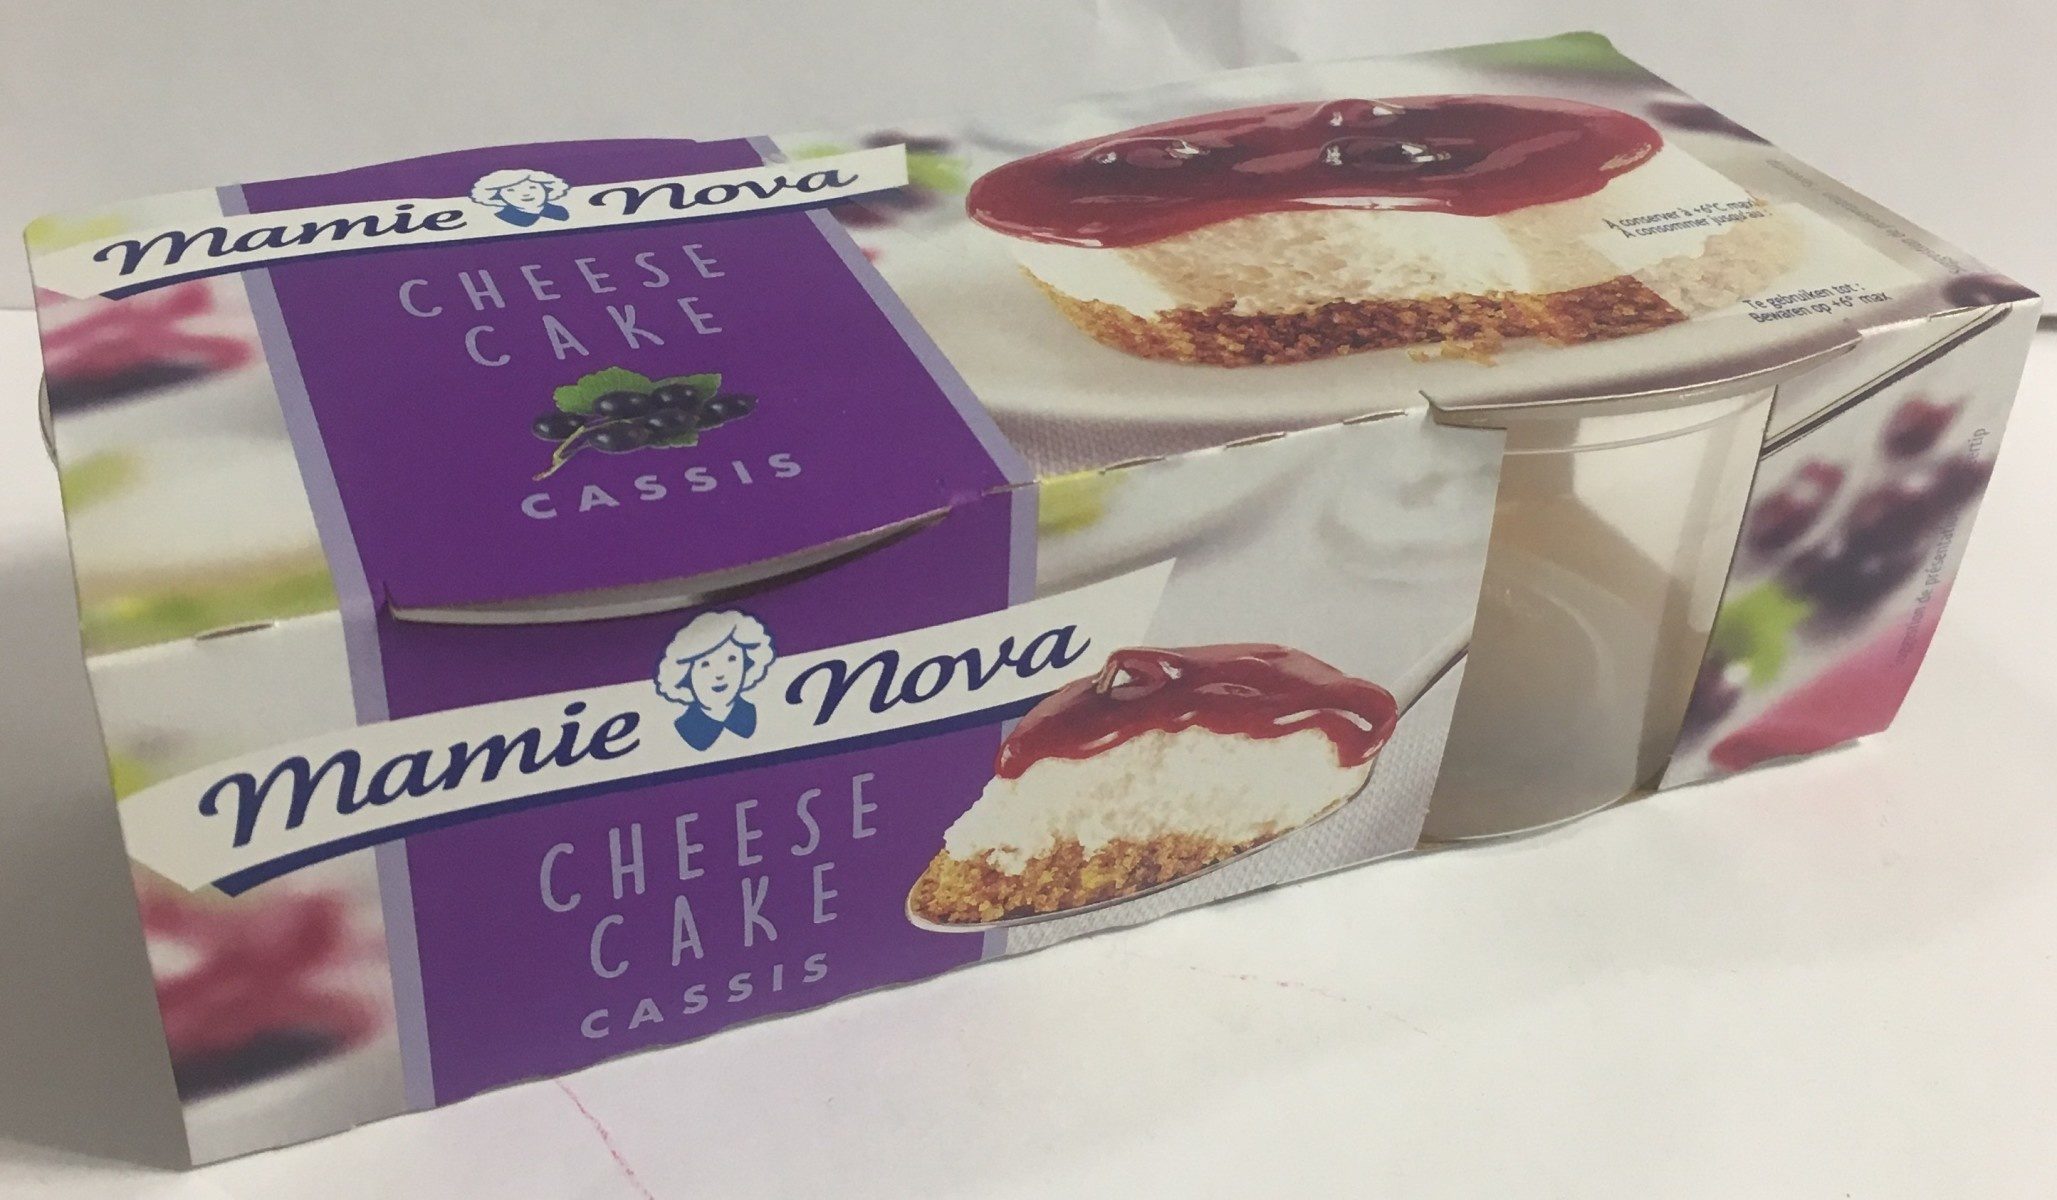 Cheese cake cassis - Product - fr